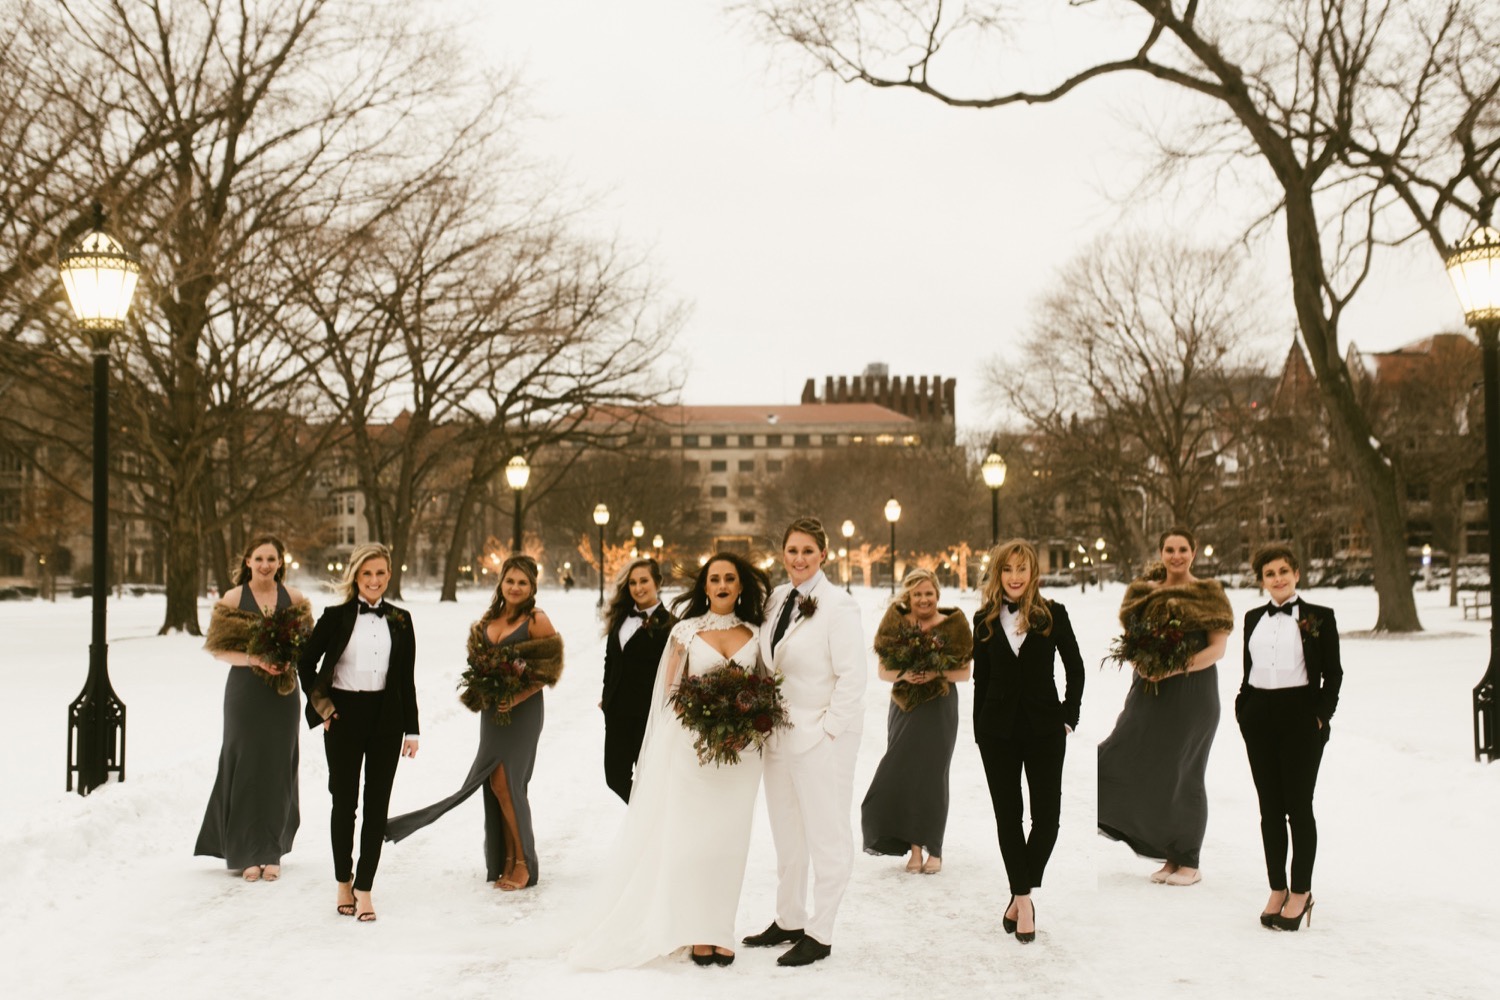 Chicago bride and bride with wedding party in the back on a snowy day.